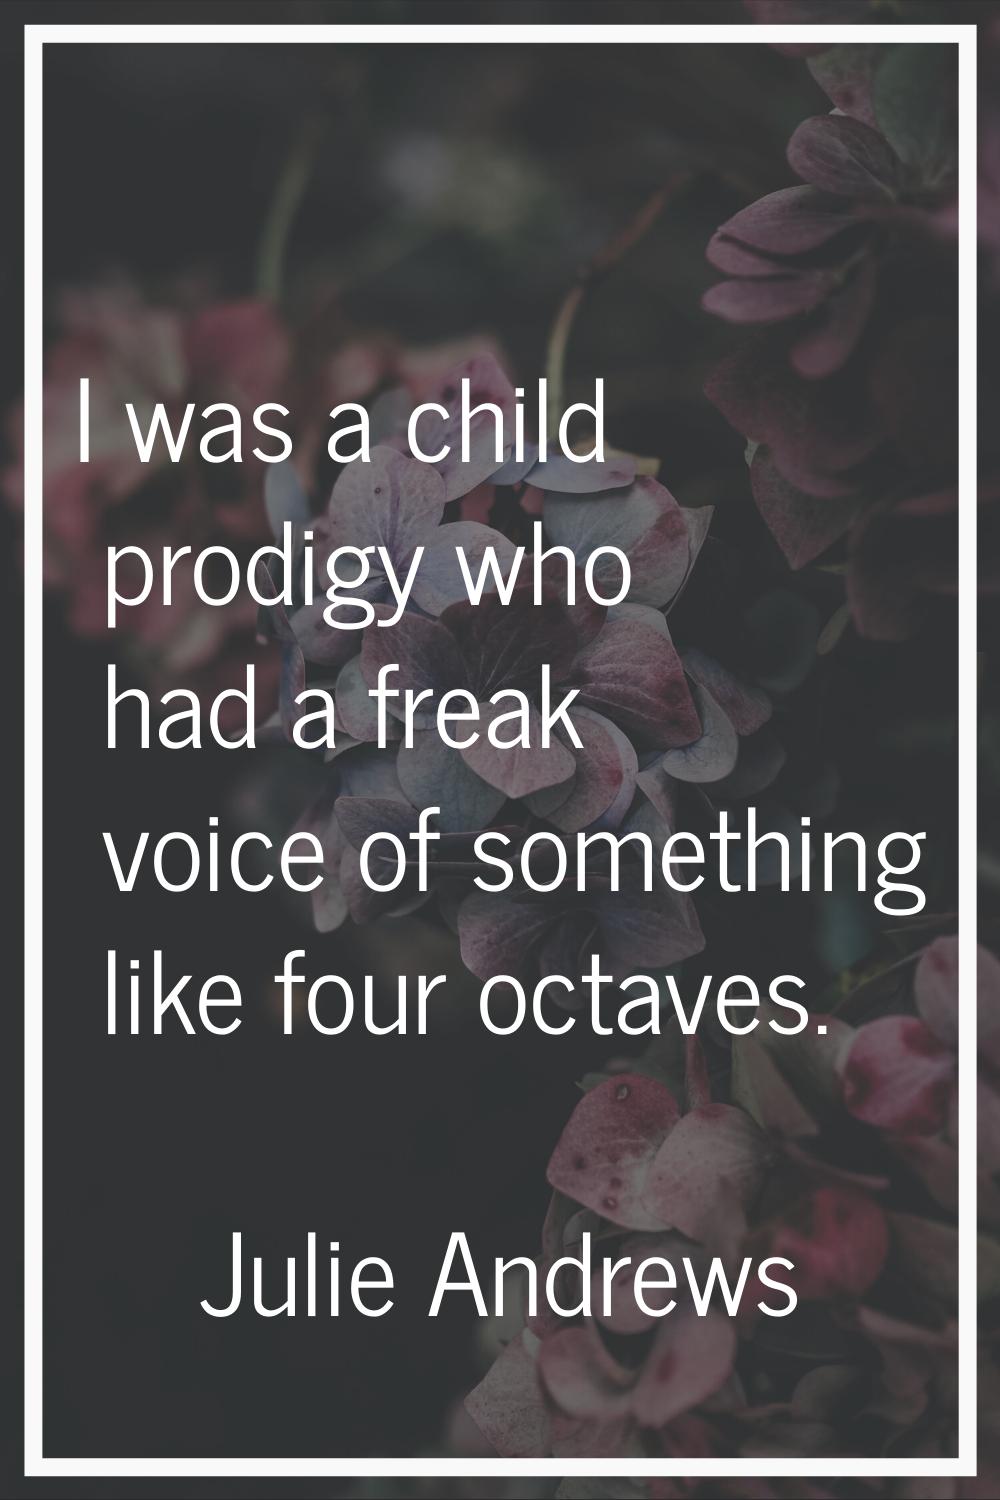 I was a child prodigy who had a freak voice of something like four octaves.